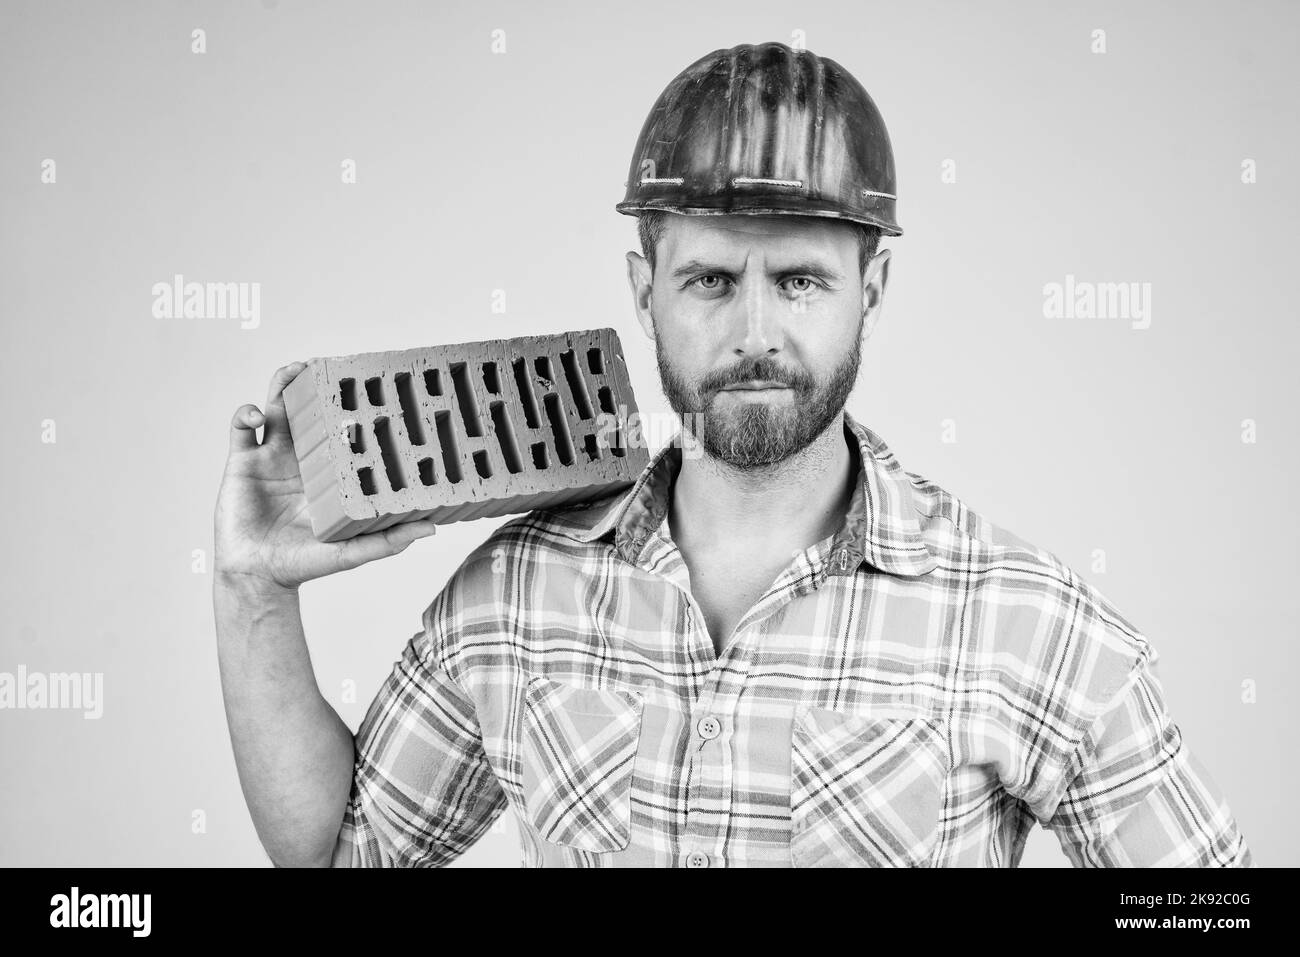 man bricklayer in construction helmet and checkered shirt on building site with brick, brickwork. Stock Photo